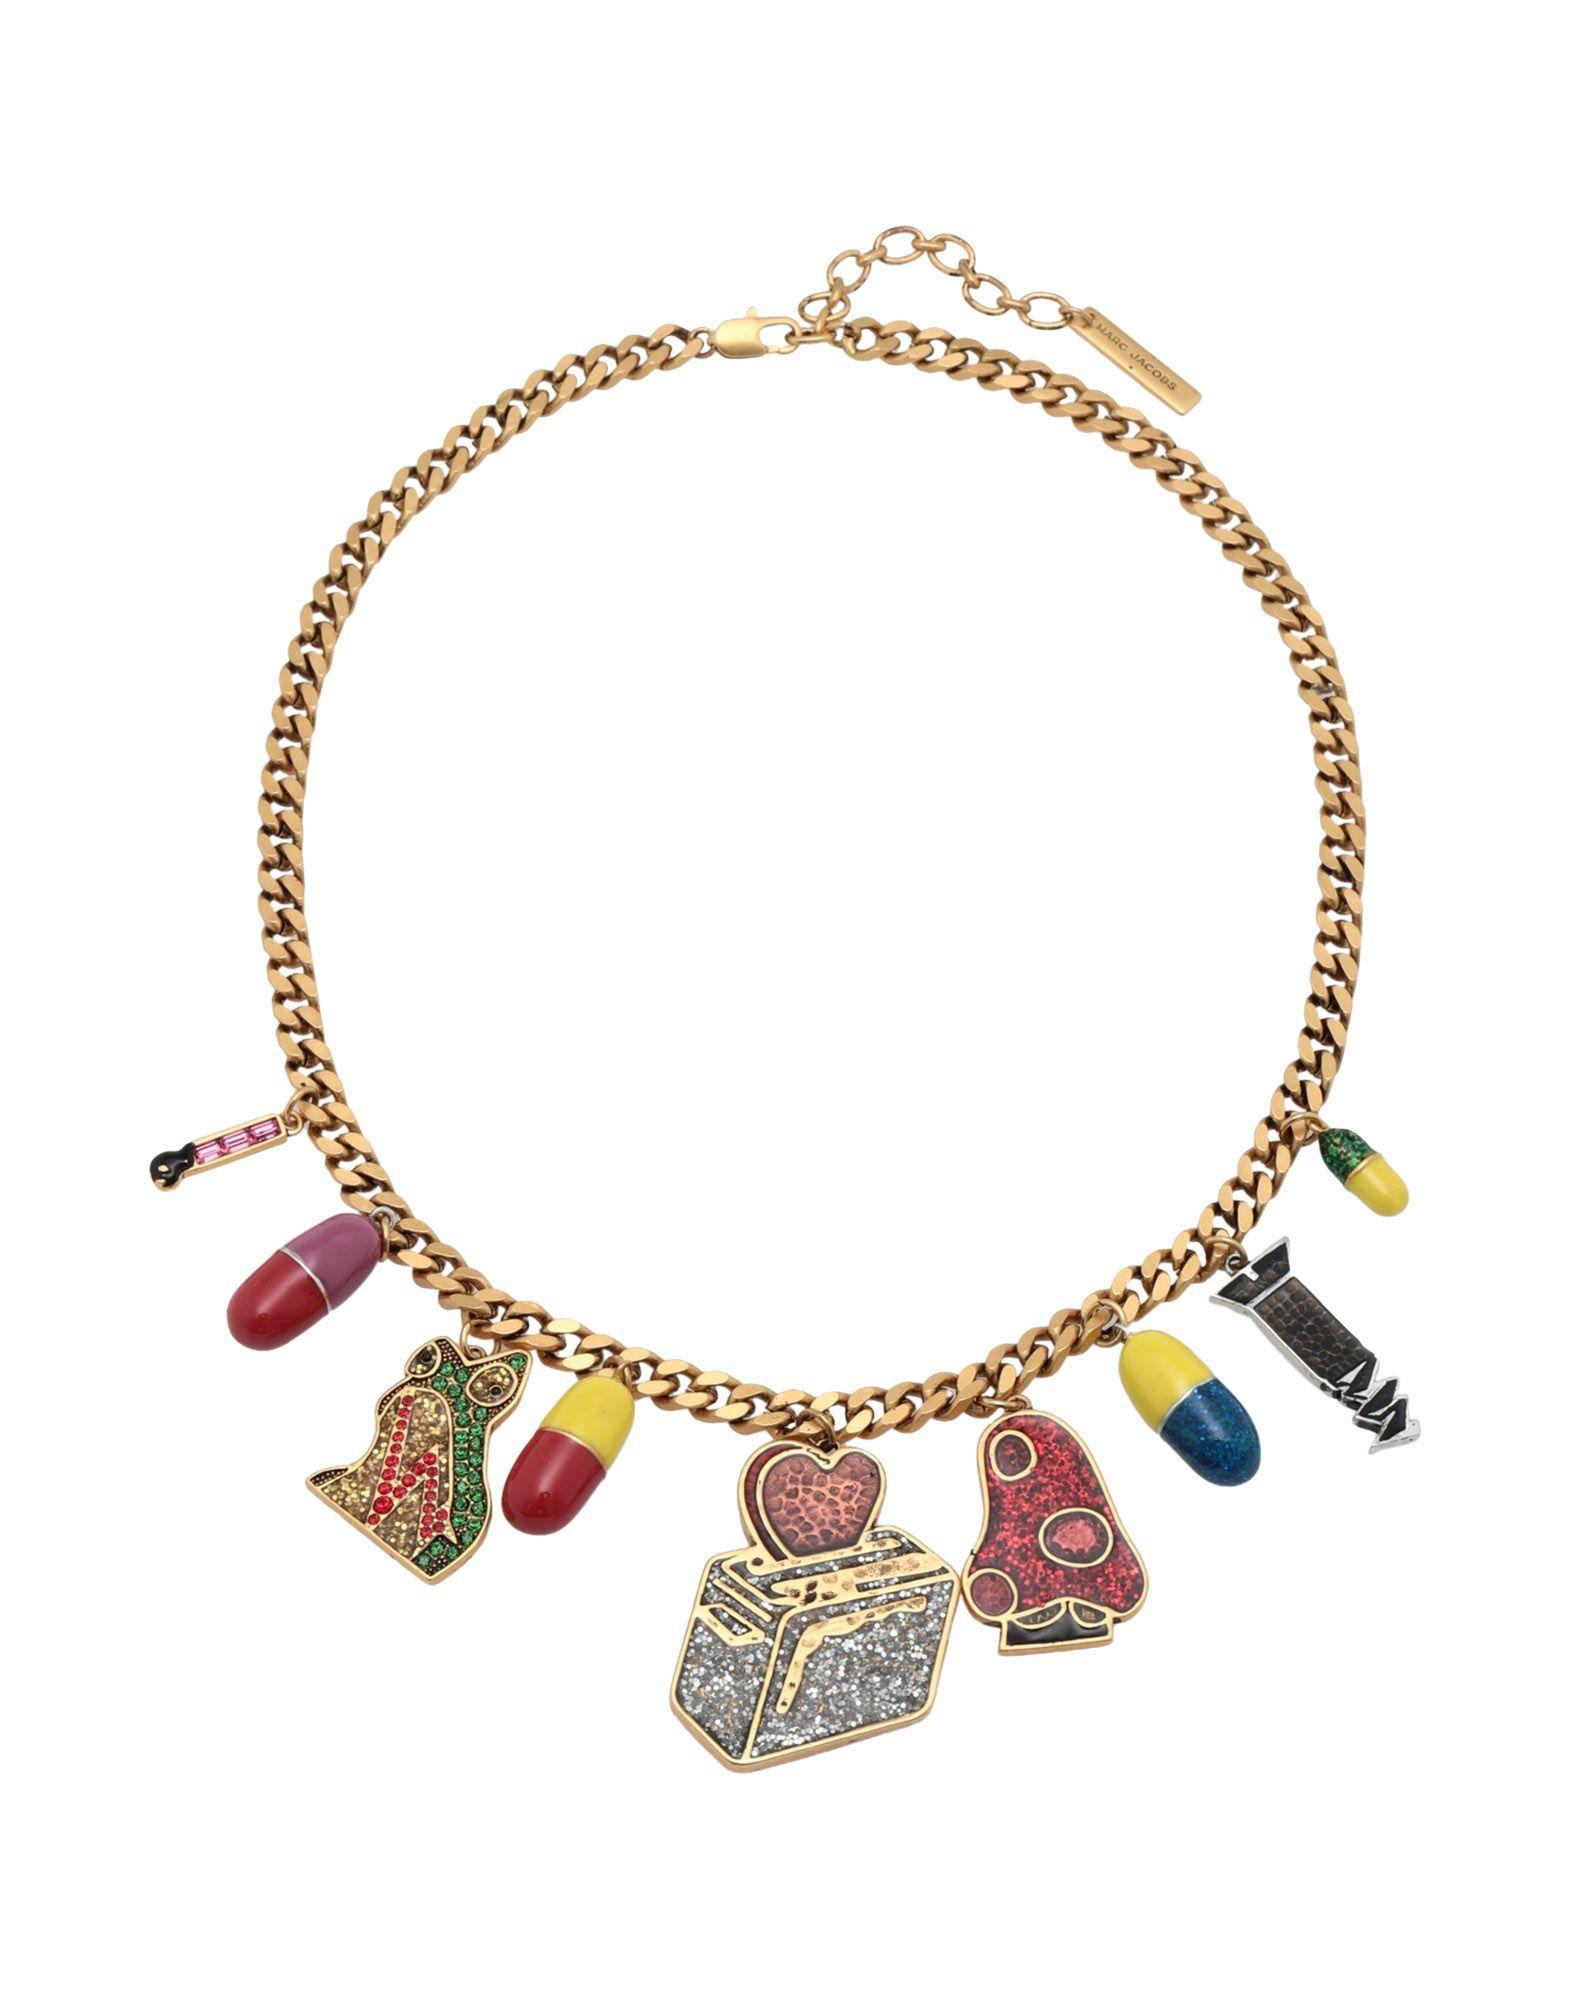 Marc Jacobs Necklace in Gold (Metallic) - Lyst